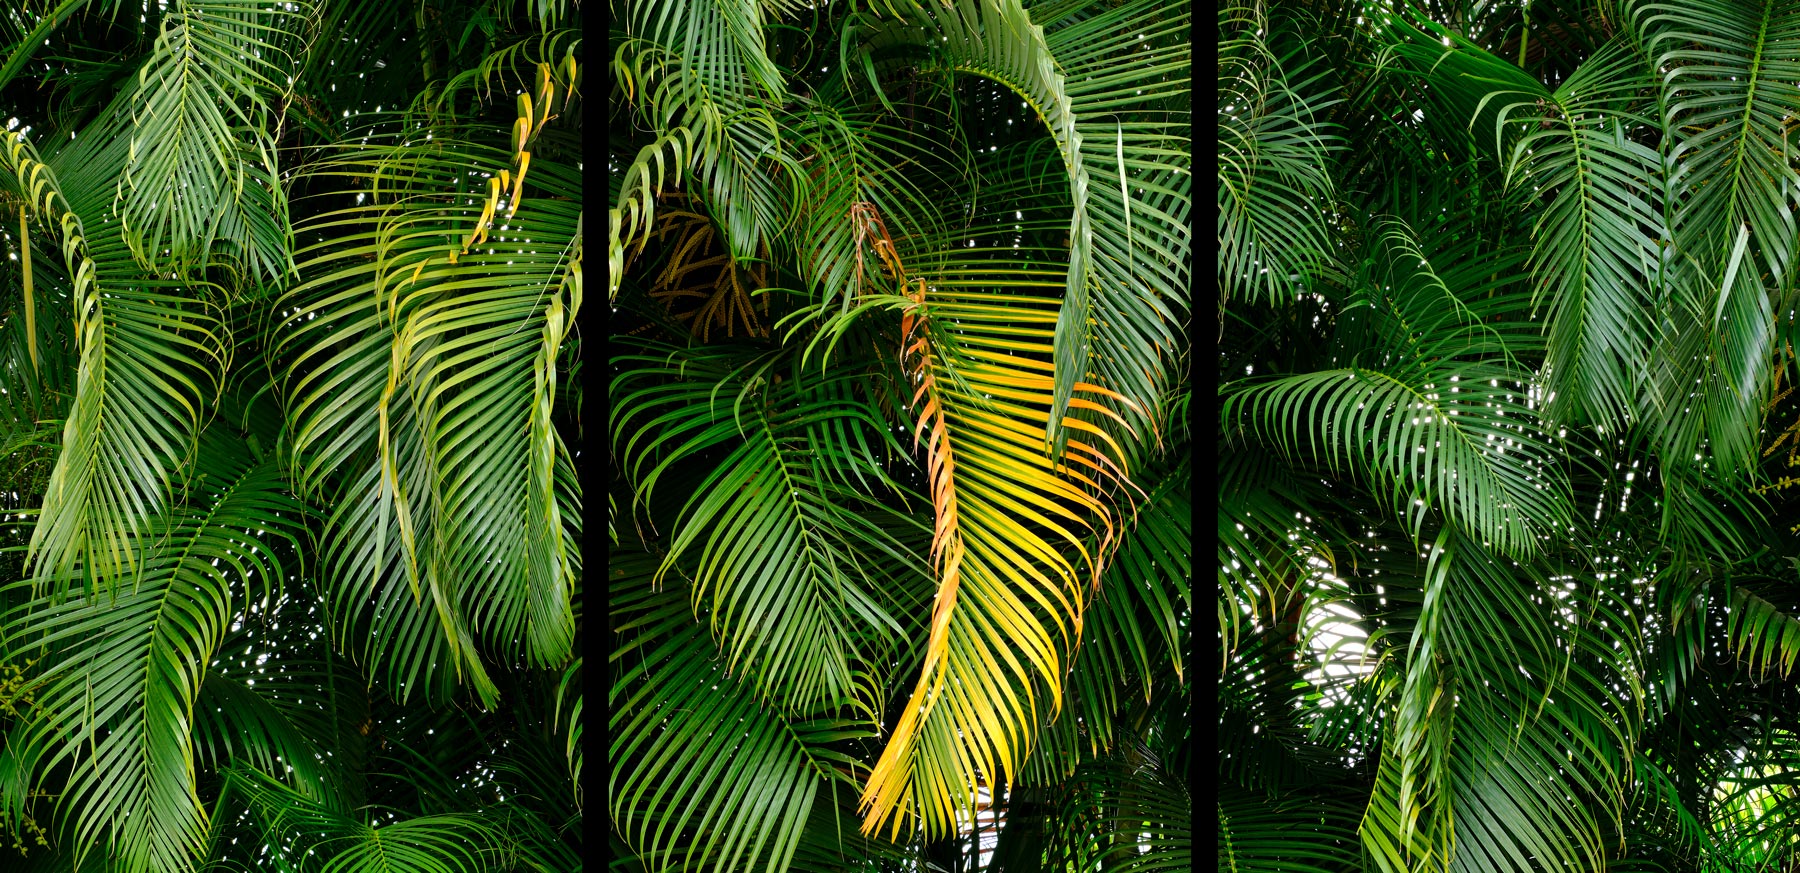 one palm stands out from the others in this abstract photograph of green palms taken by award winning Maui photographer Andrew Shoemaker.  Arranged into a 3 pan